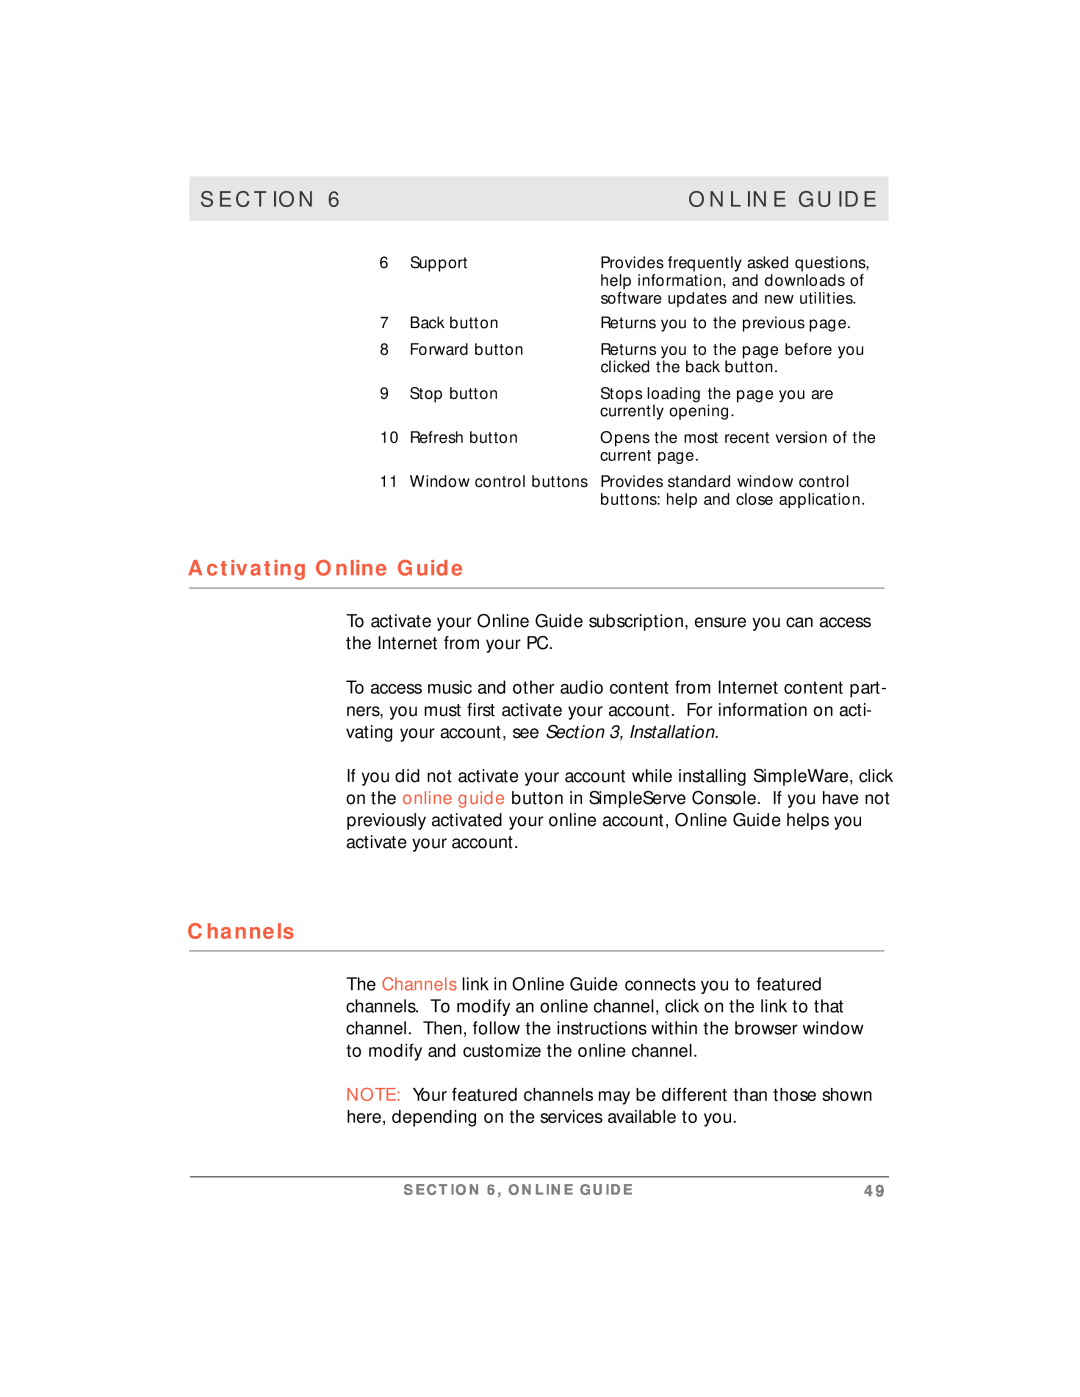 Motorola simplefi manual Activating Online Guide, Section, Channels 